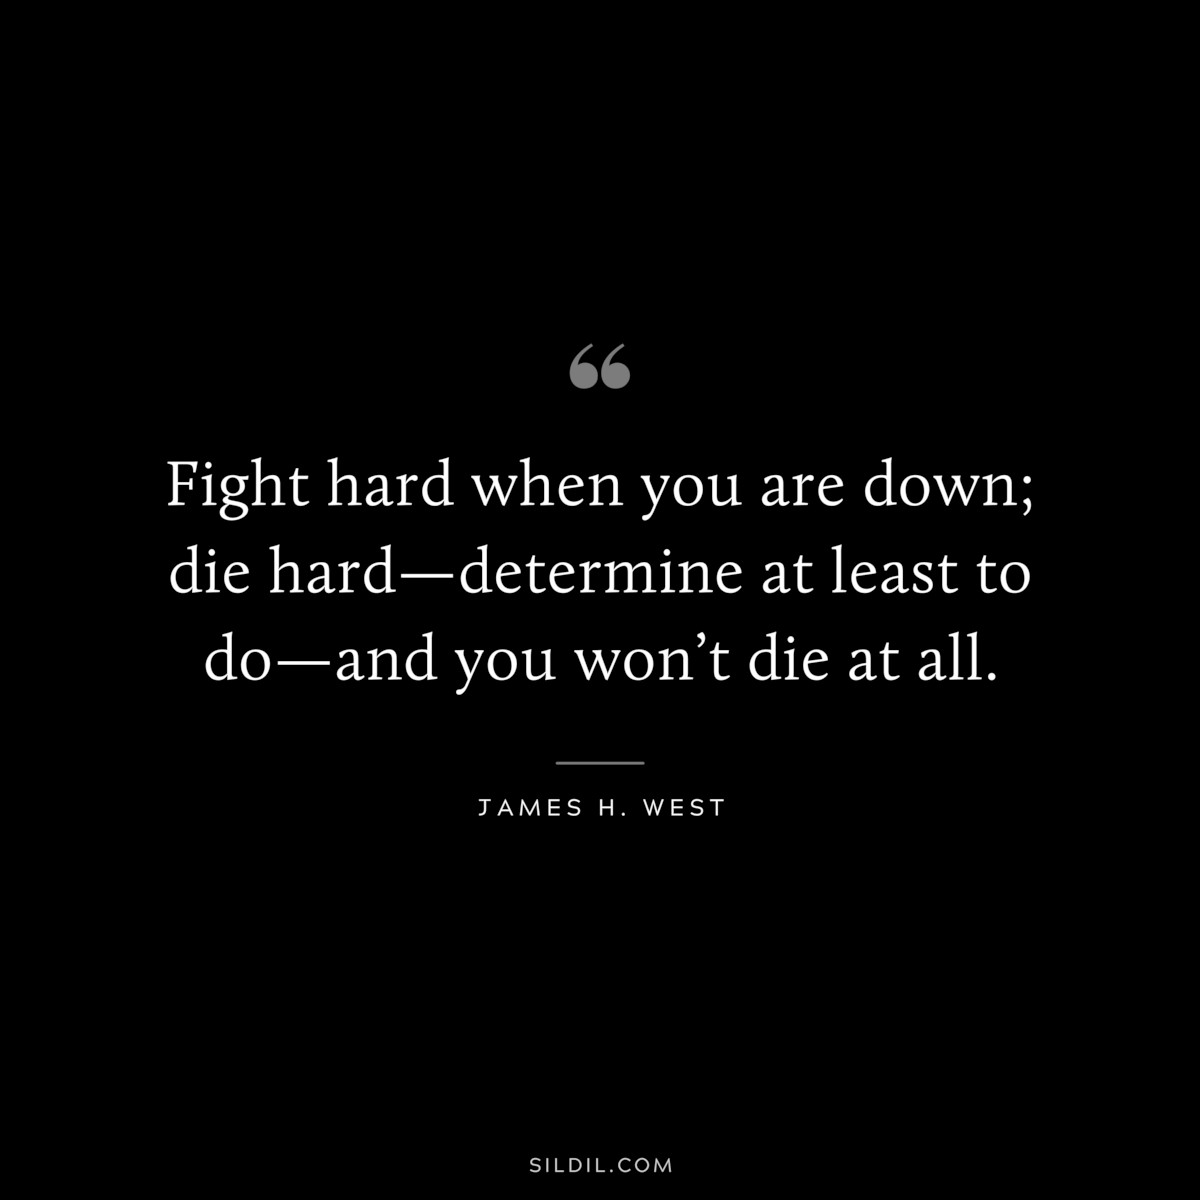 Fight hard when you are down; die hard—determine at least to do—and you won’t die at all. ― James H. West